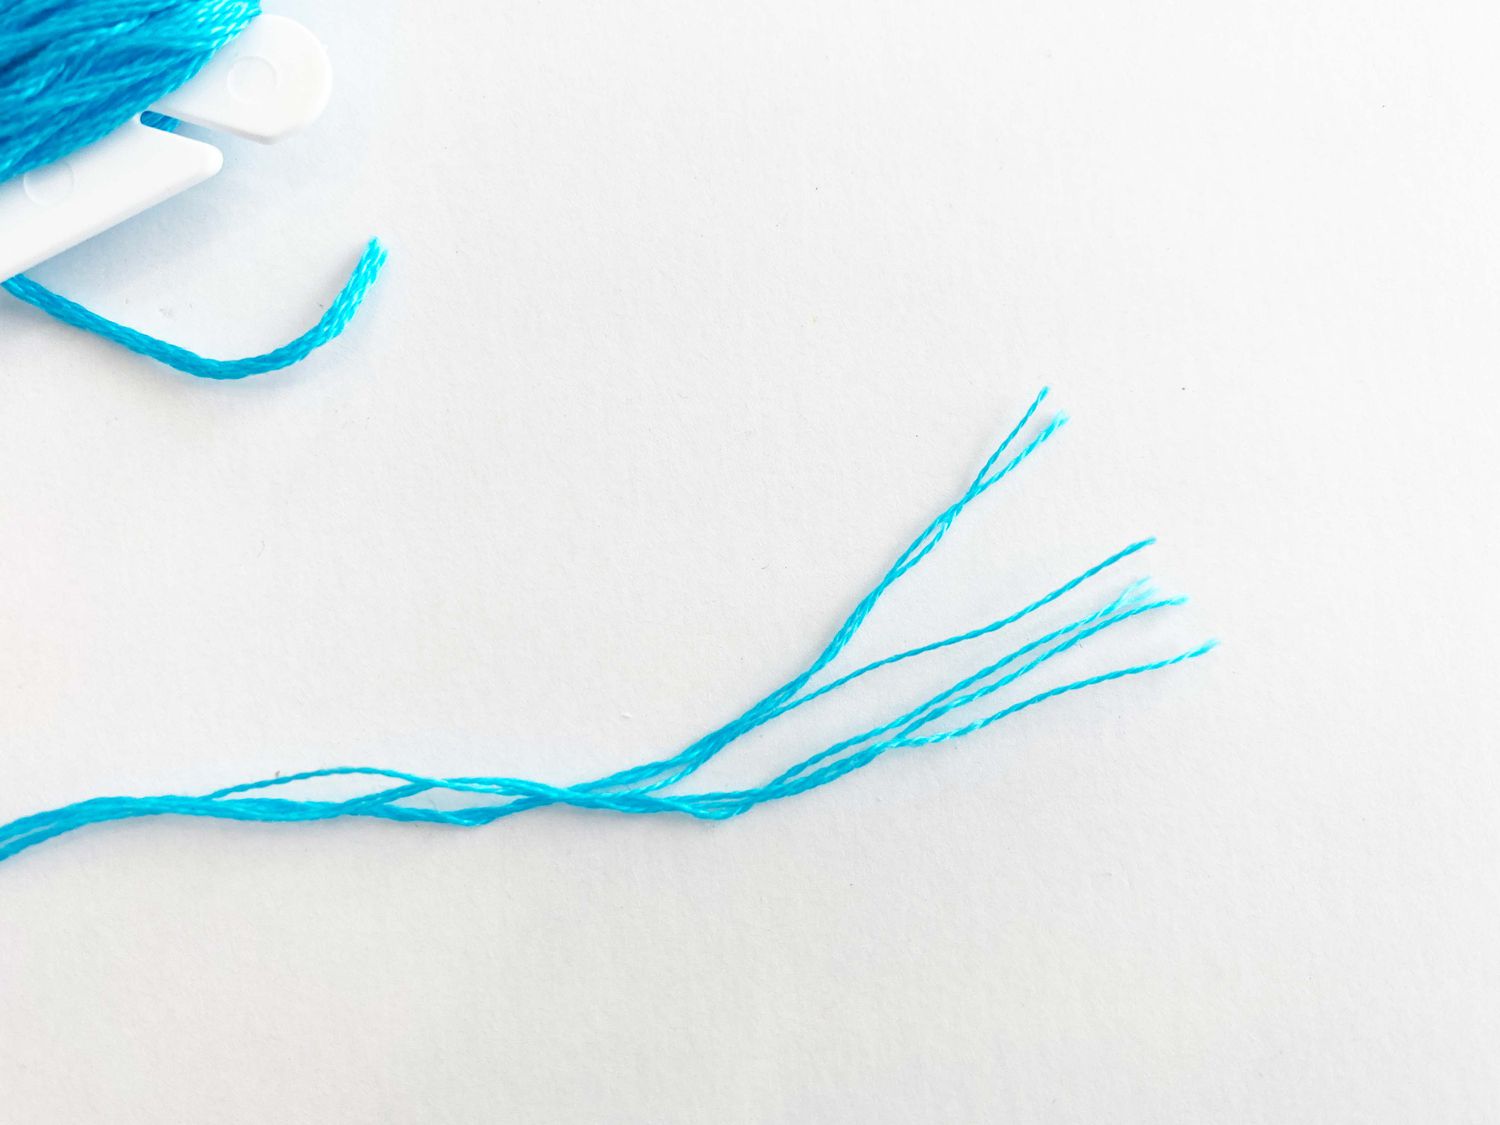 A close-up of embroidery floss divided up into strands